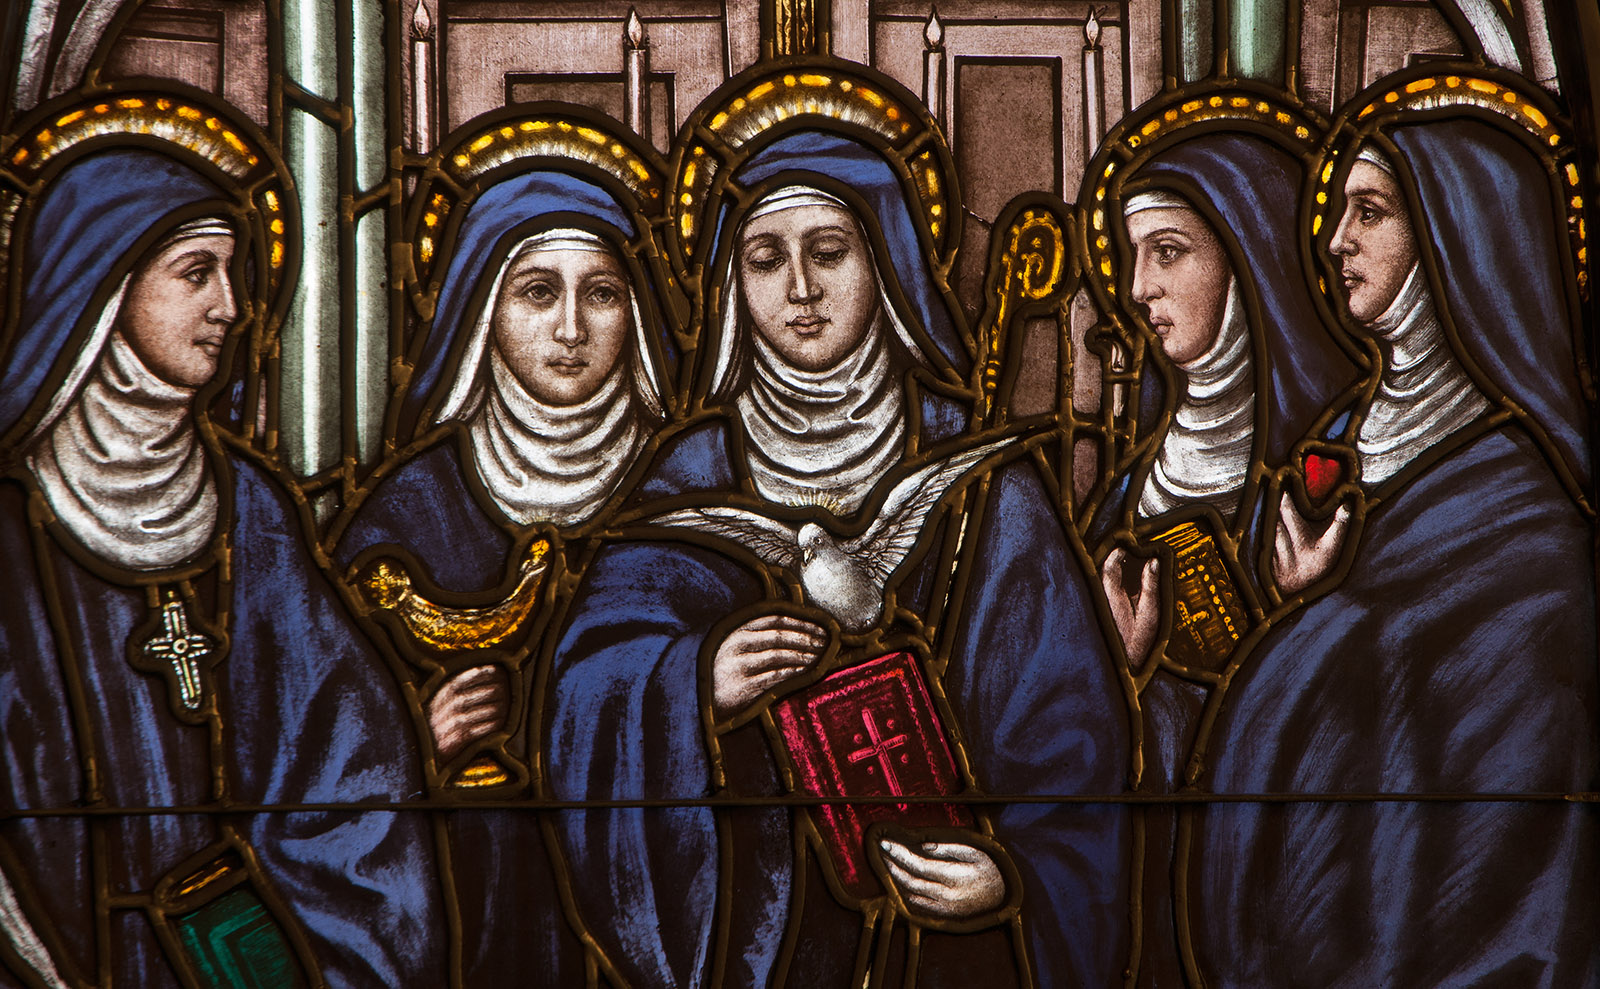 blue and red stained glass window depicting five nuns in habits